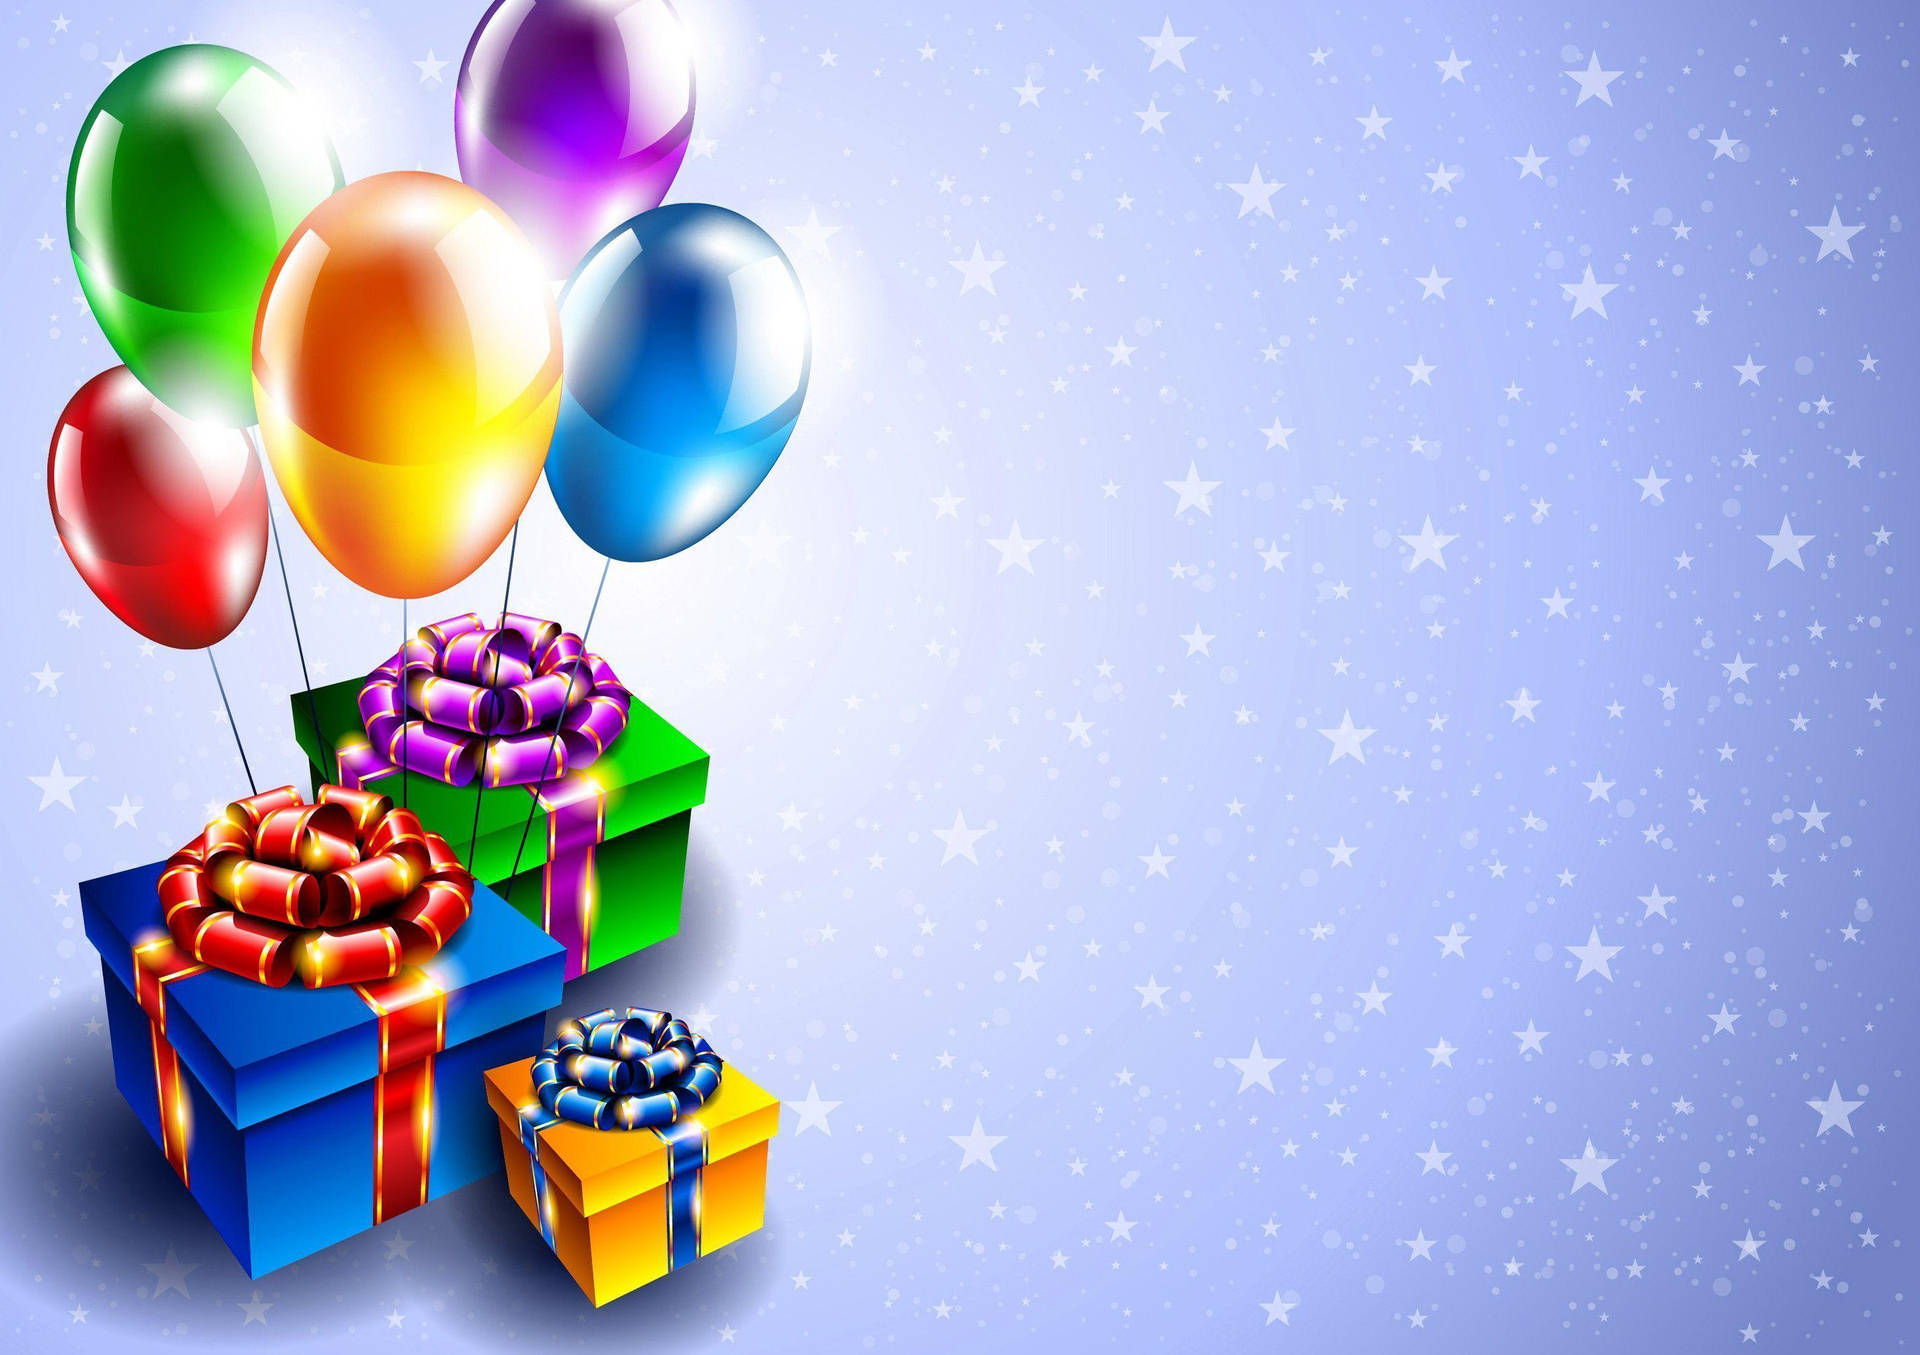 Celebrate Your Special Day with Balloons and Presents! Wallpaper